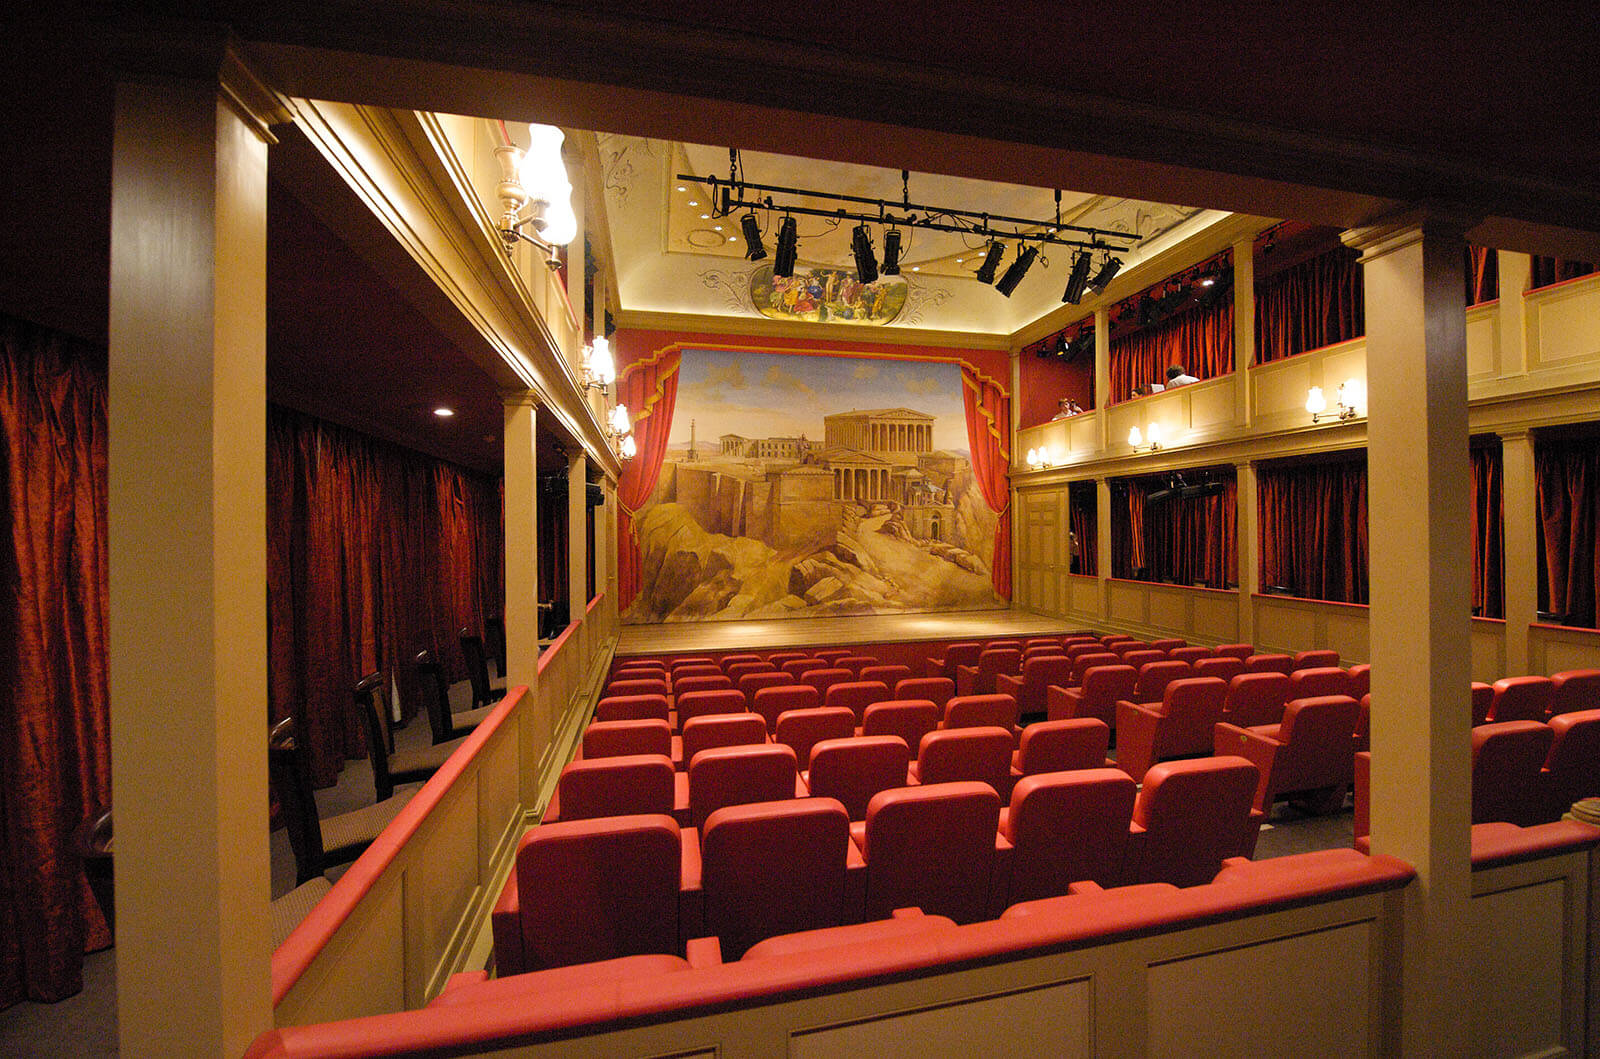 Theatre with red seats and red side curtains